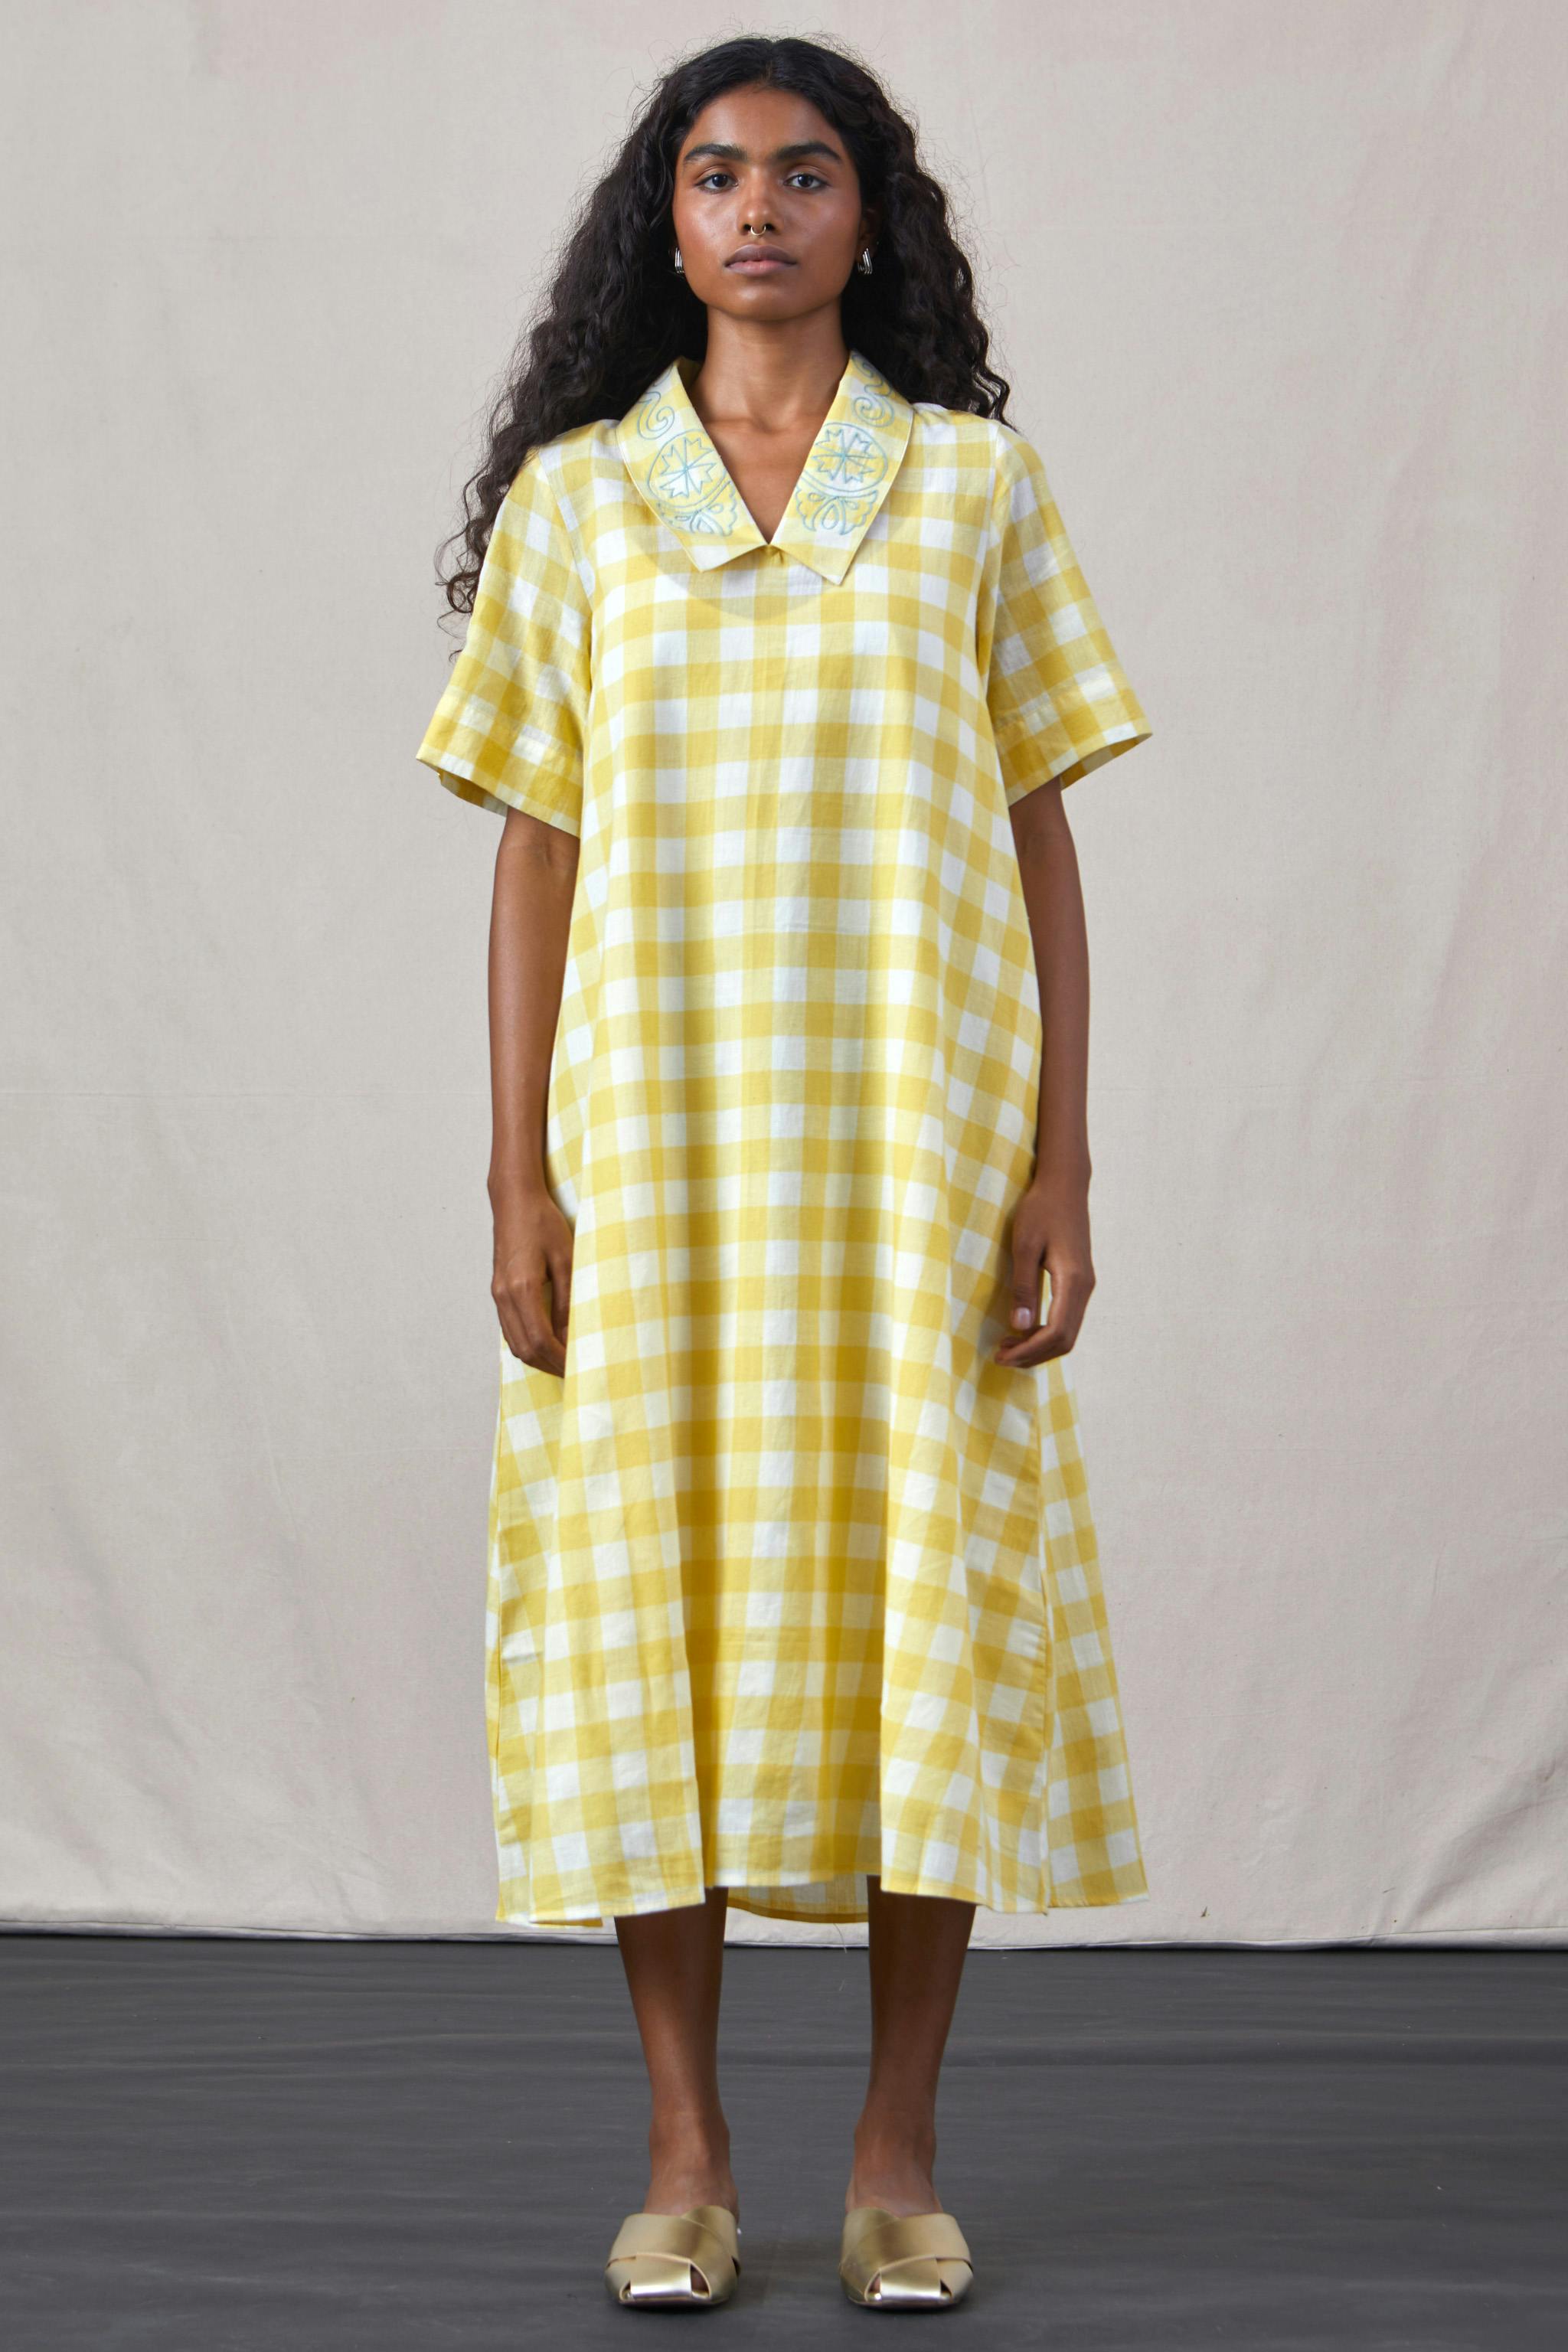 Navvi - Dress Yellow, a product by The Summer House